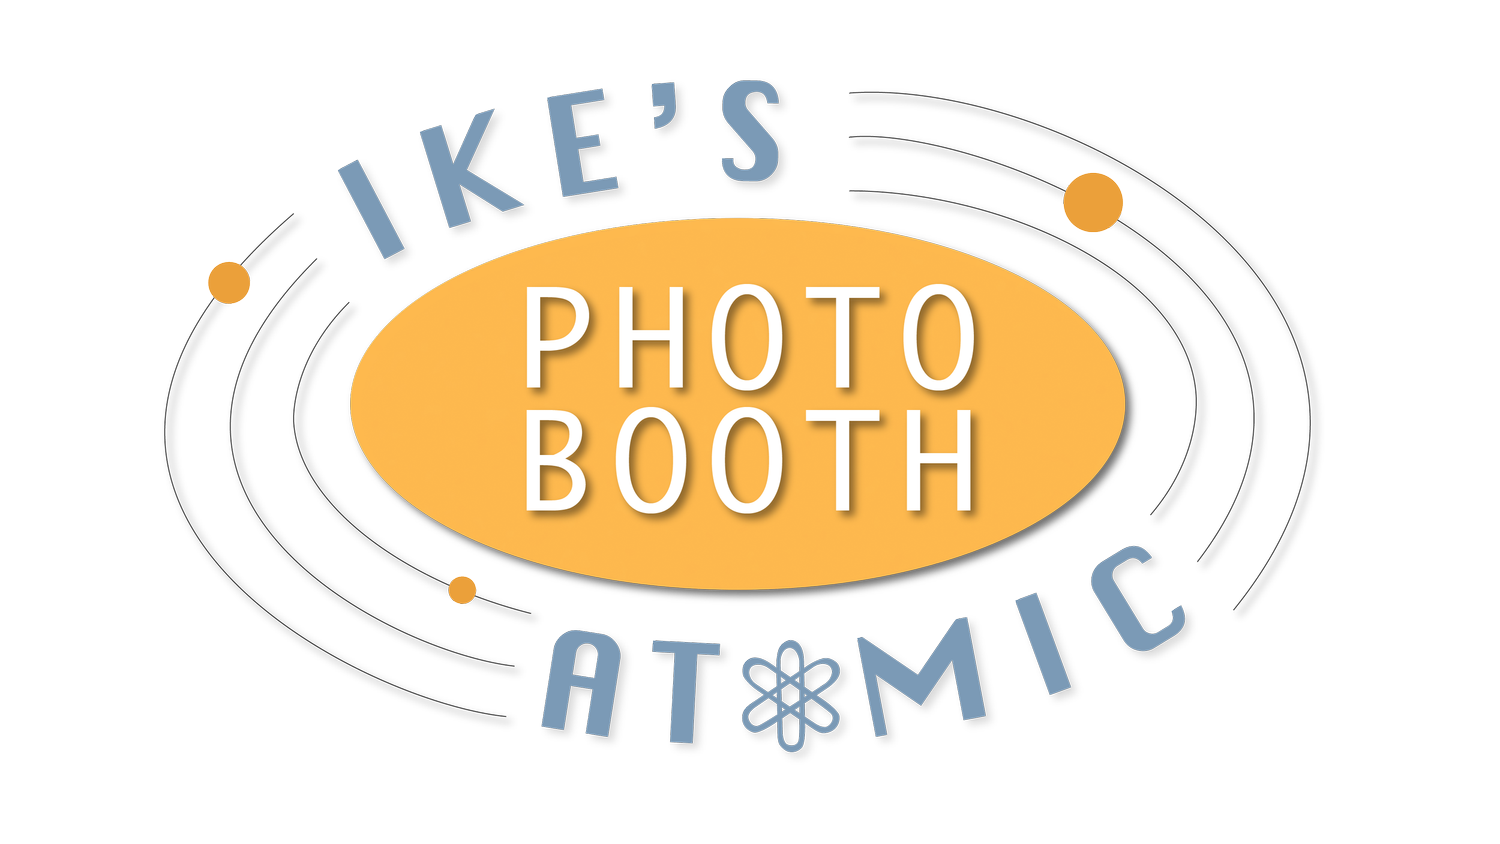 Ikes Atomic Photo Booth